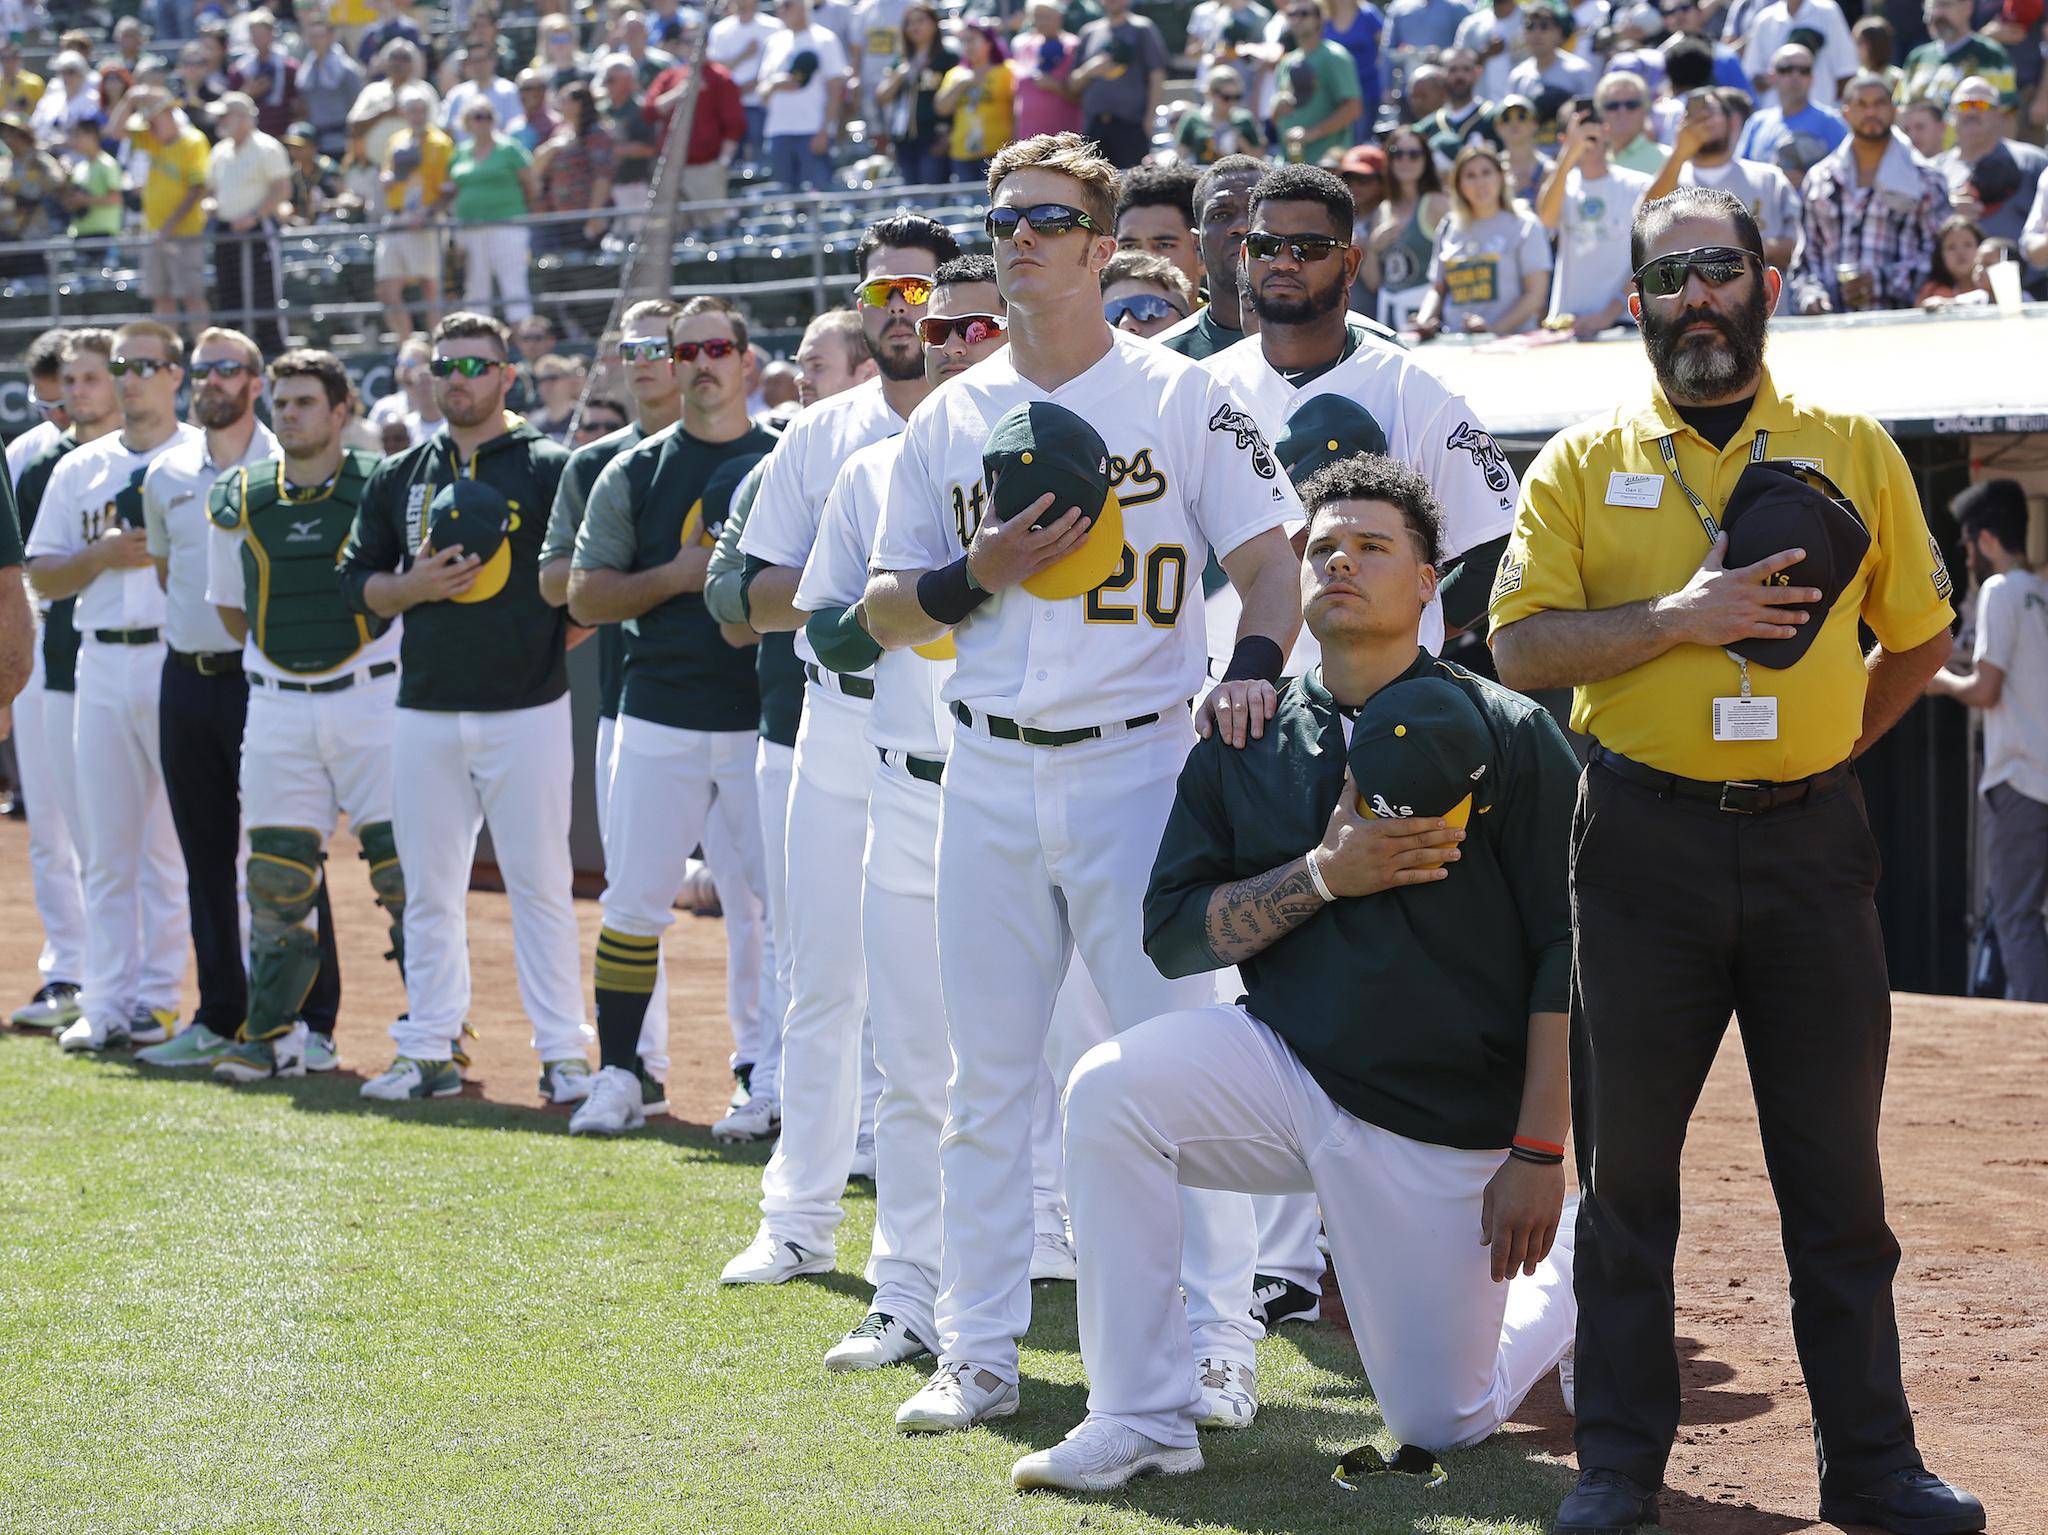 Oakland Athletics' Mark Canha (20) places his hand on the shoulder of Bruce Maxwell as Maxwell takes a knee during the national anthem prior to a baseball game against the Texas Rangers